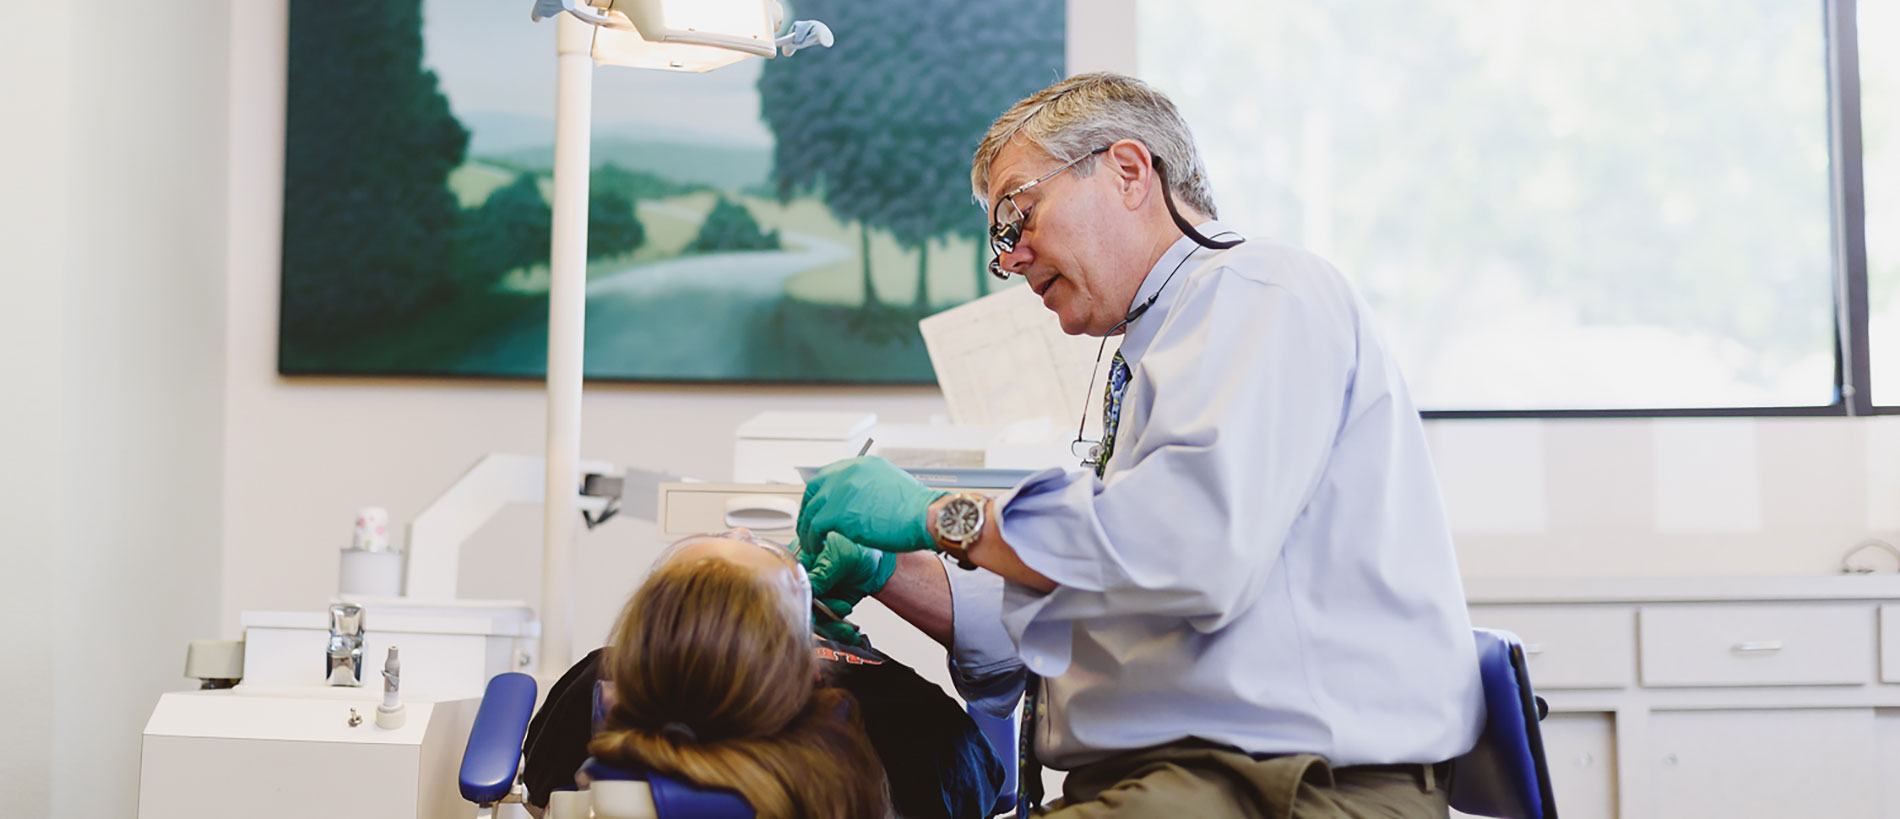 5 Signs That You Should Take Your Child to an Orthodontist